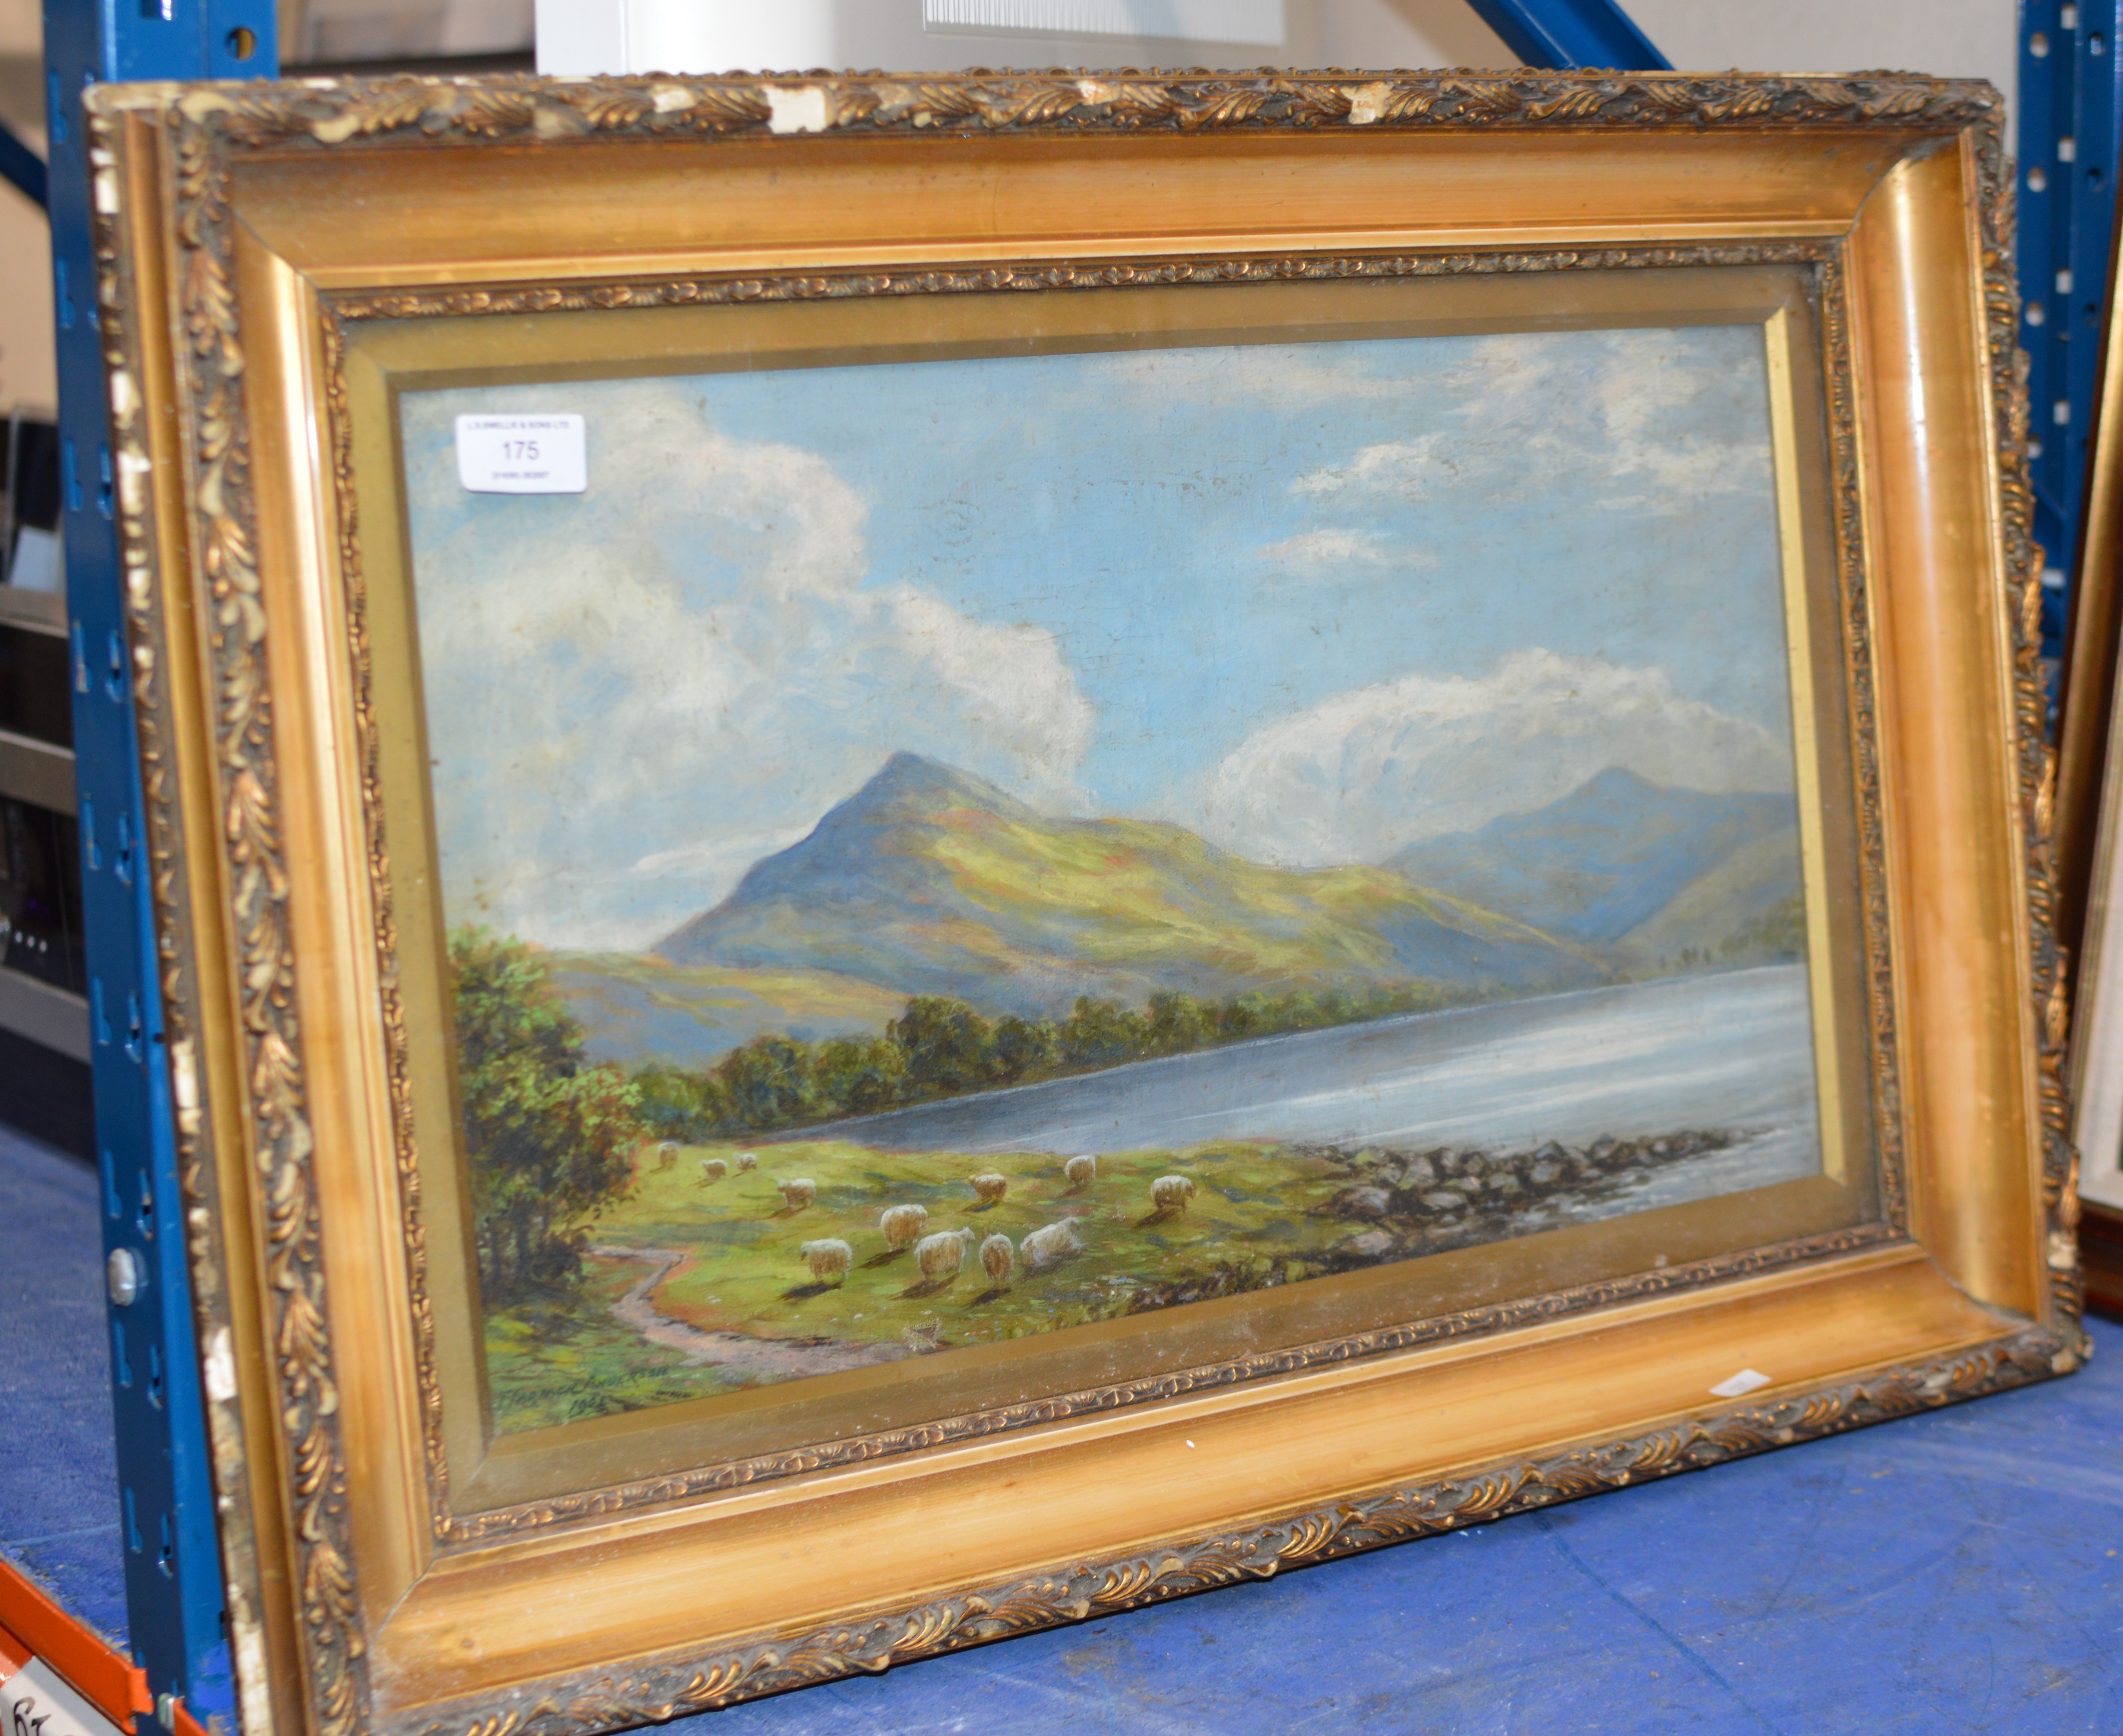 FRAMED OIL ON CANVAS - SHEEP BY A LOCH SIDE, SIGNED T. FARMER ANDERSON, 1902